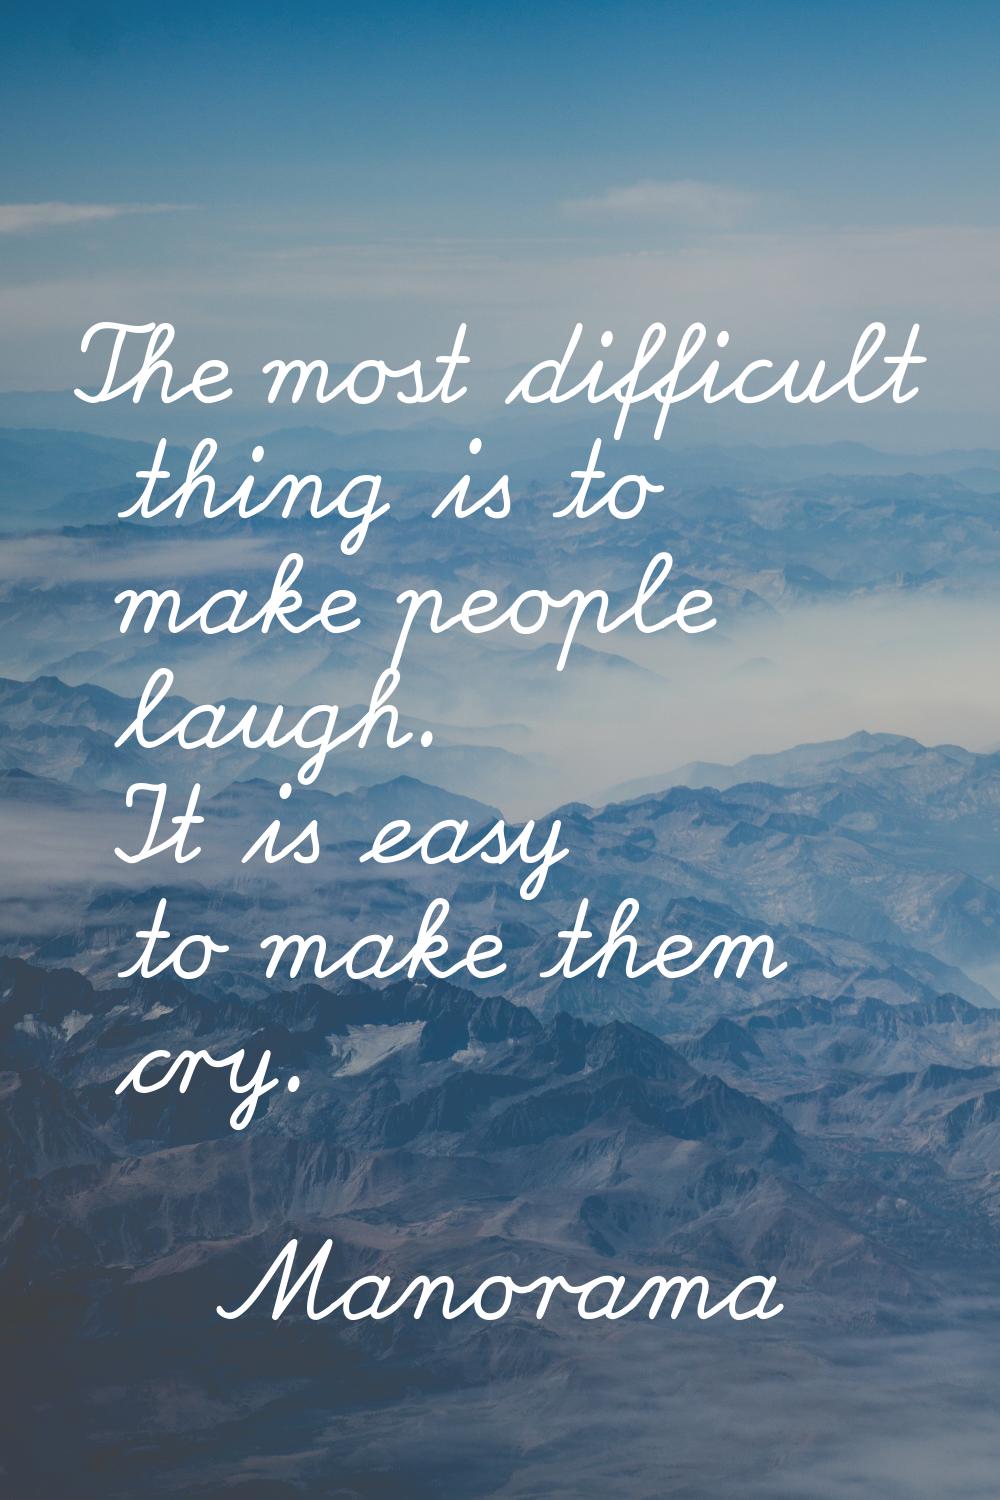 The most difficult thing is to make people laugh. It is easy to make them cry.